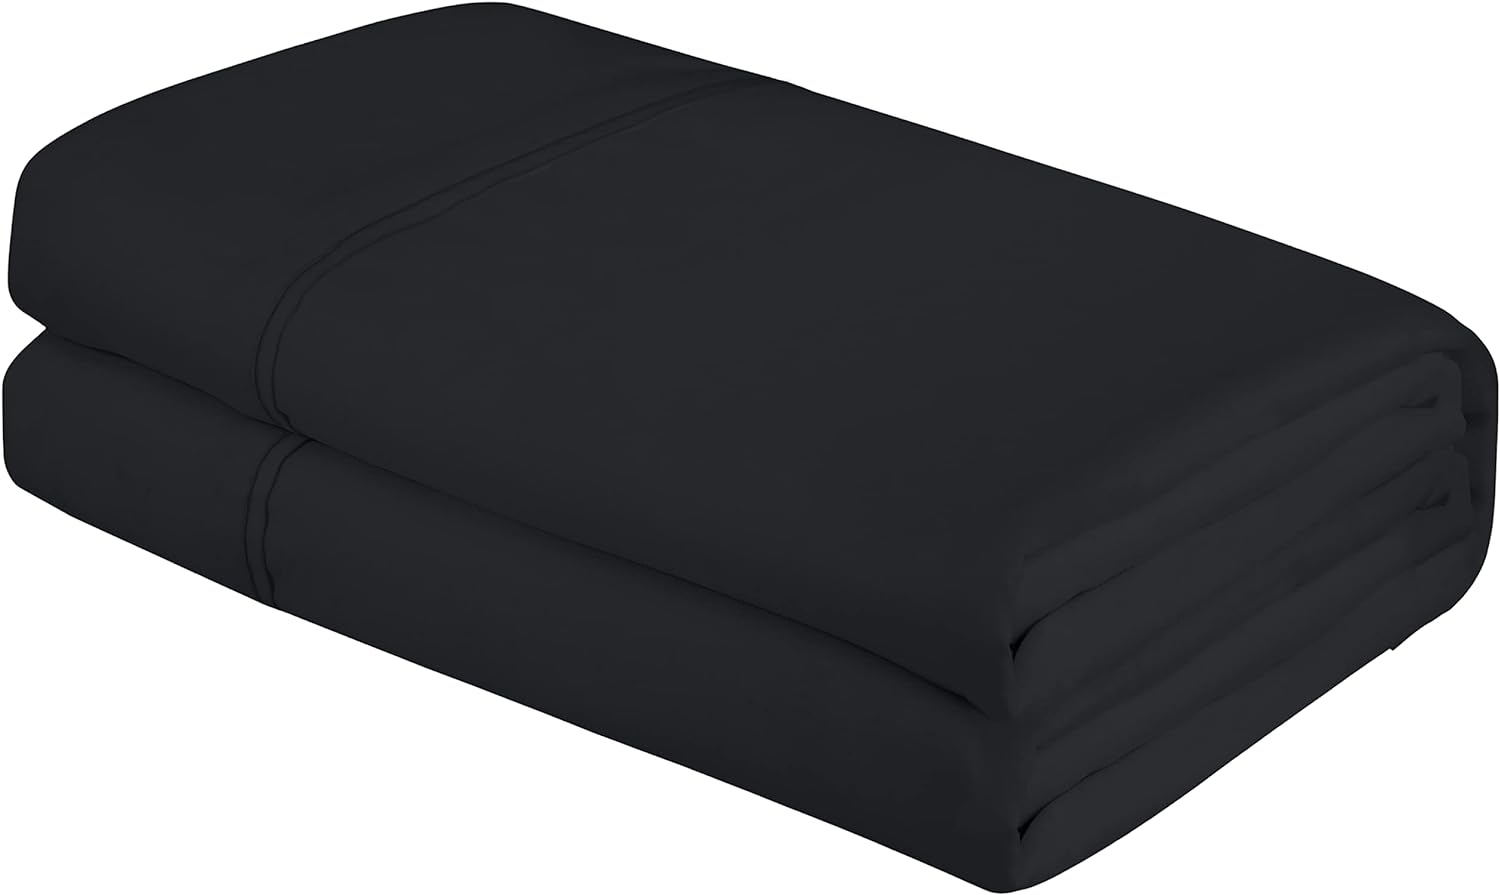 Royale Linens Queen Size Flat Sheet Only - Brushed 1800 Microfiber - Ultra Soft & Breathable - Wrinkle & Stain Resistant - Hotel Quality Flat Sheet Sold Separately - Top Sheet For Bed - (Queen, Black)